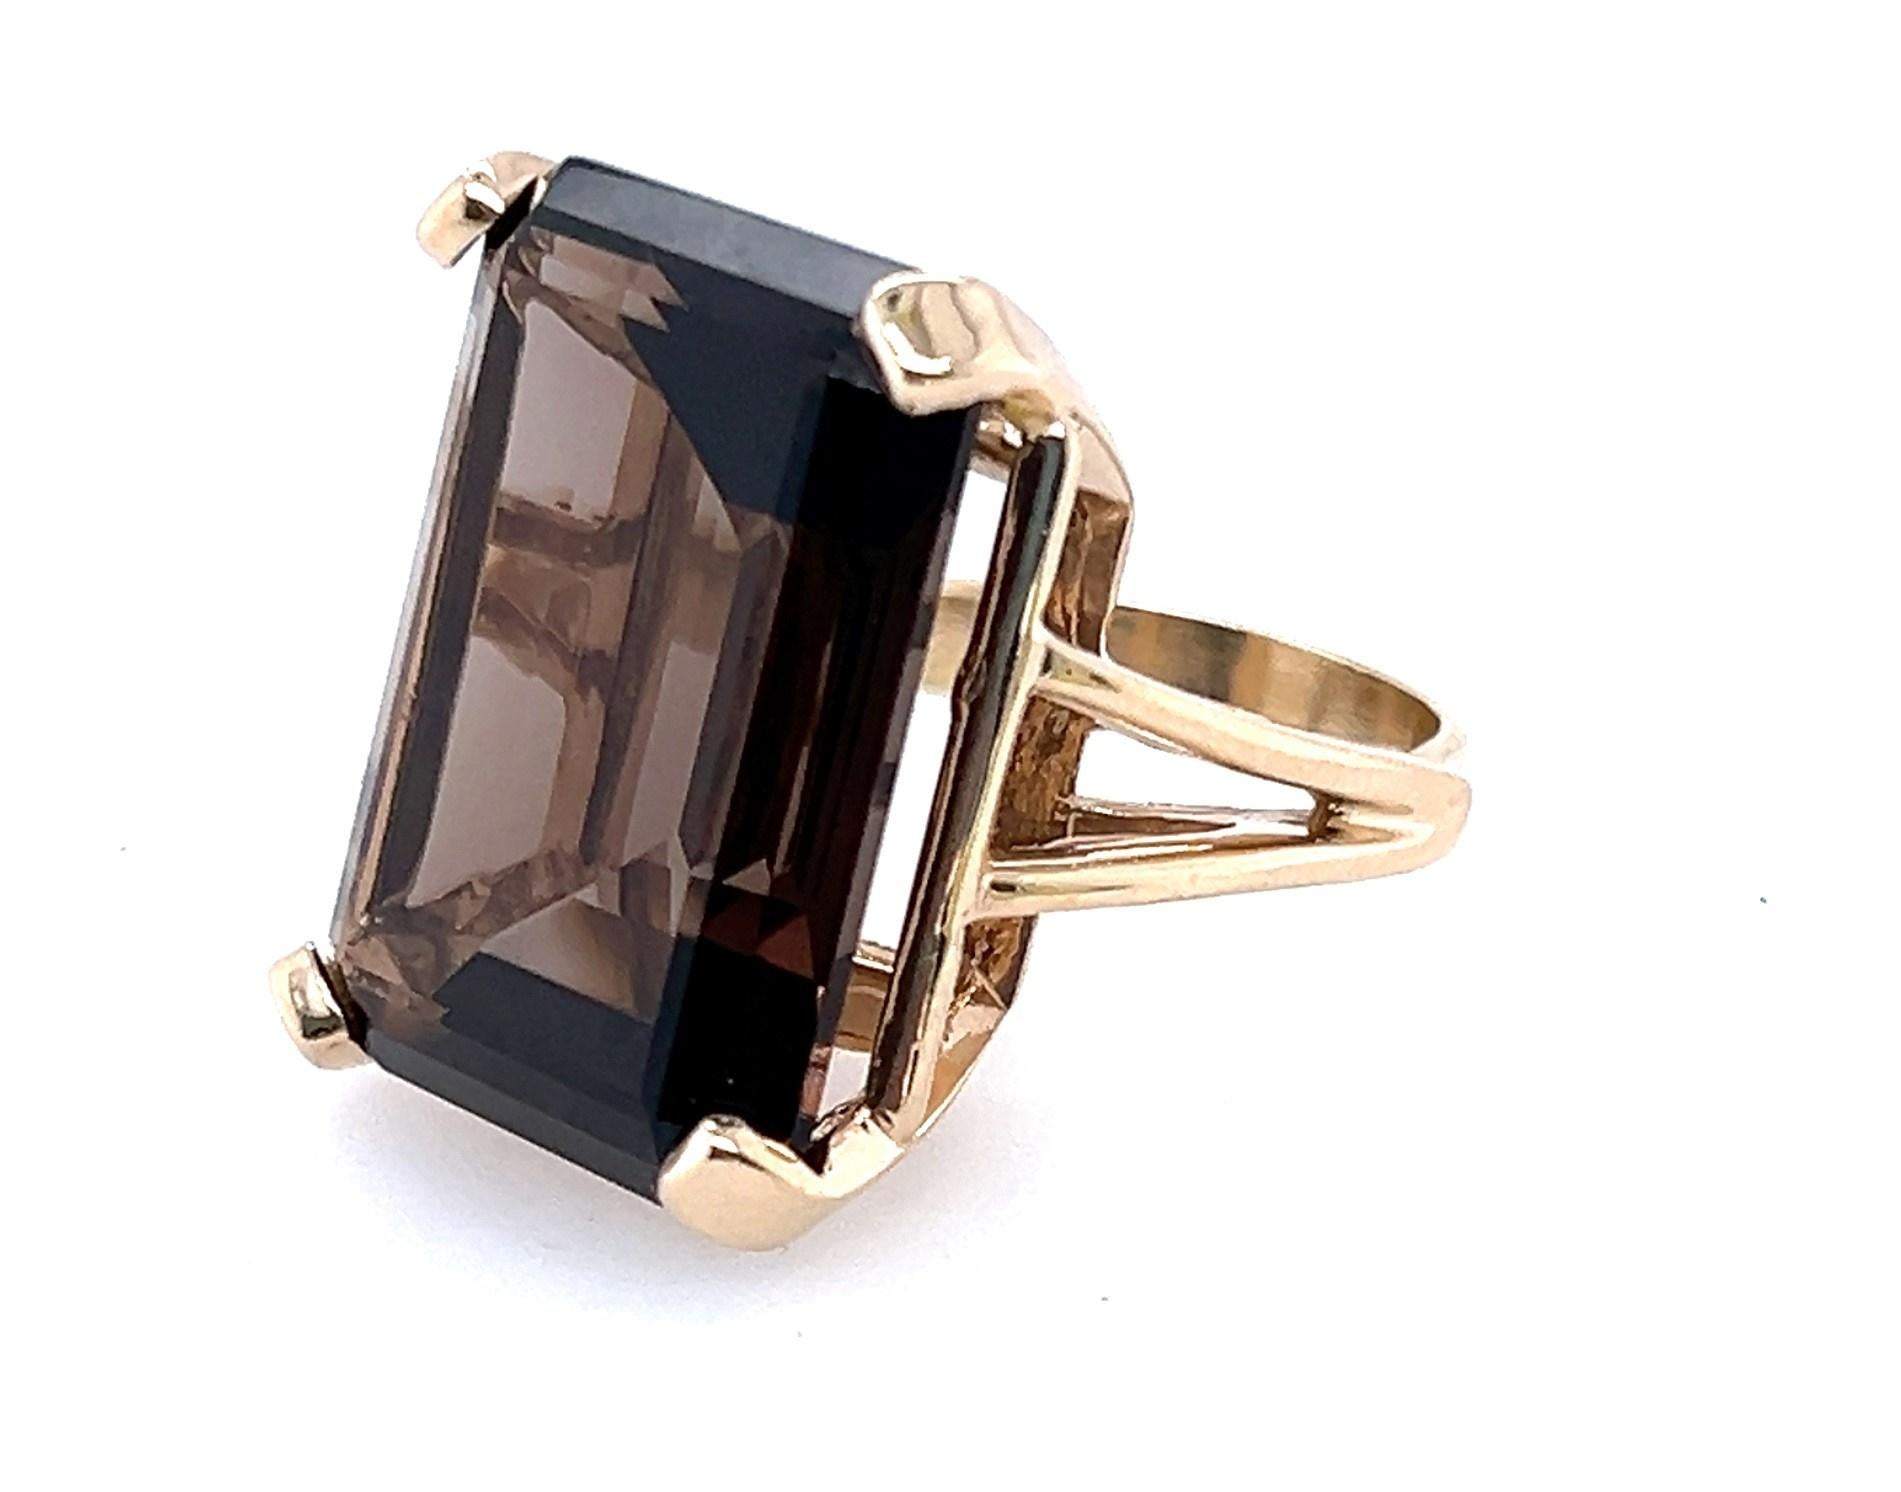 A statement ring in a neutral color to go with everything!

This ring is a whopping 28.82 Carats of  Smoky Quartz goodness! The lovely neutral shade will coordinate with all your outfits and enrich each season. This is a Wear-With-Everything color